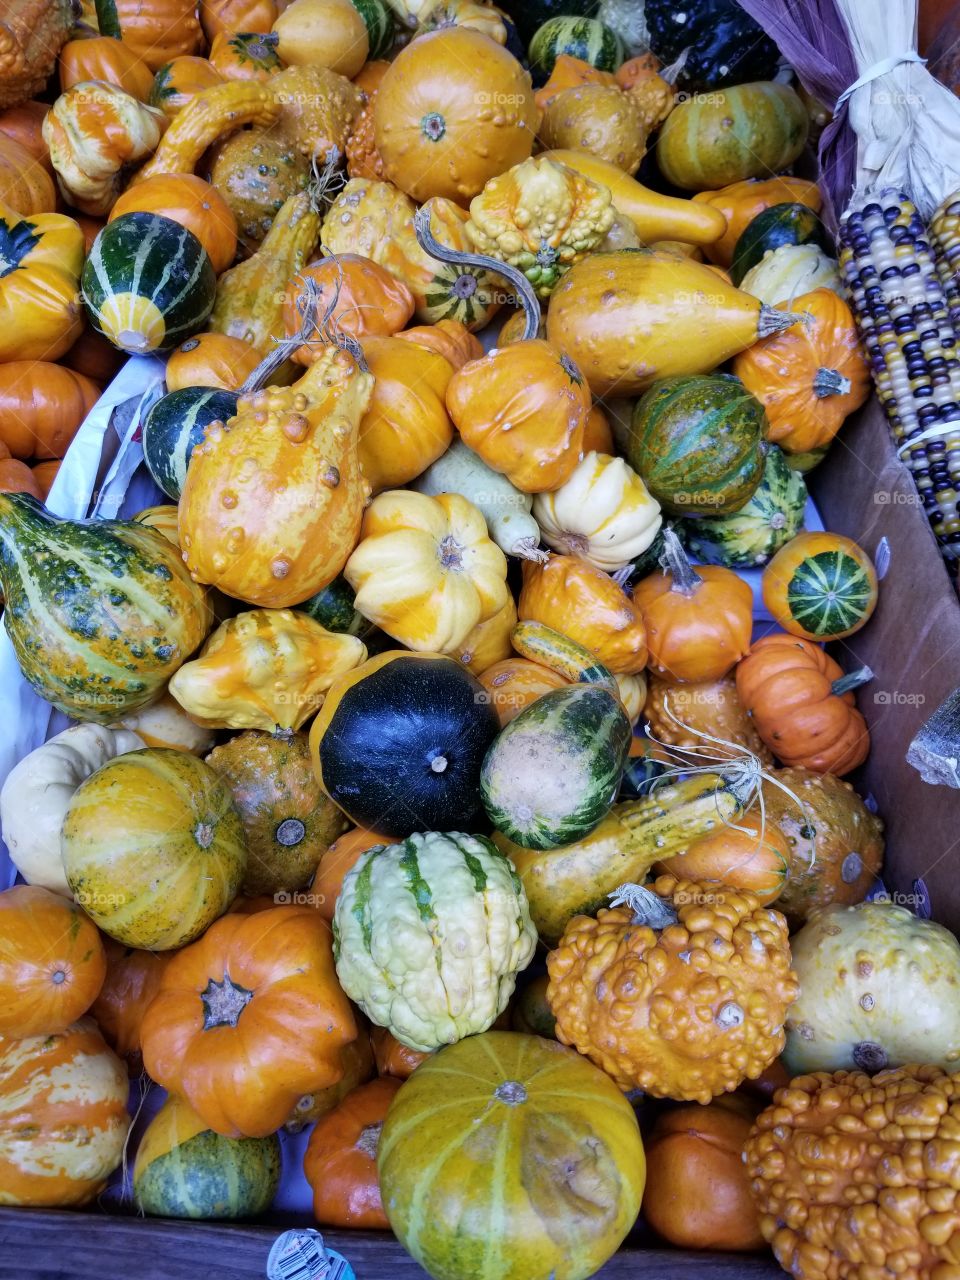 Different shapes, sizes, textures and colors of pumpkins all gathering together. Diverse and colorful.